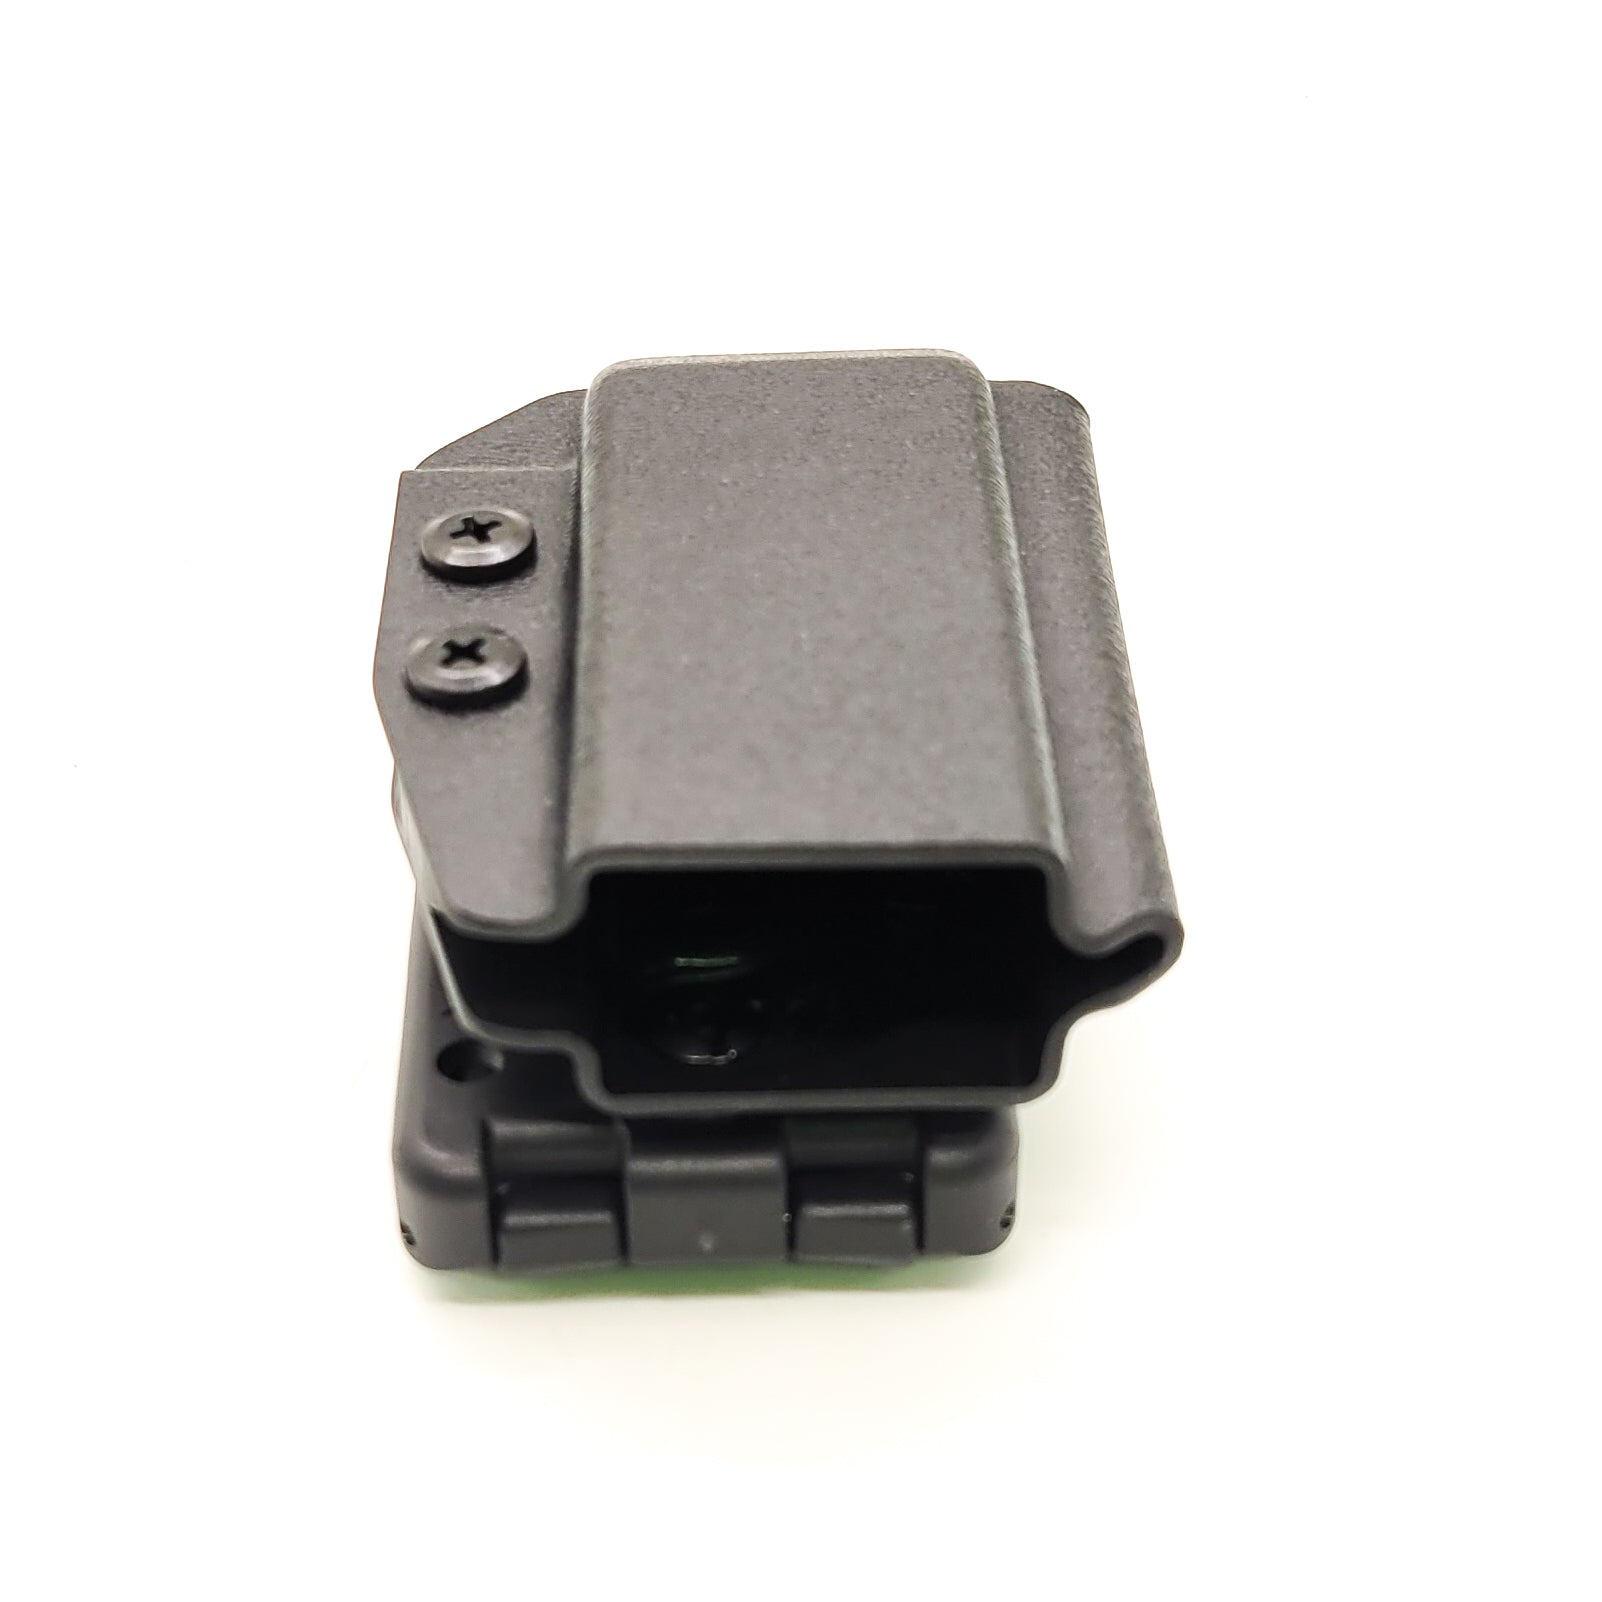 For the best, most comfortable, and rugged Kydex OWB Outside Waistband magazine pouch for Sig Sauer P320 shop Four Brothers Holsters.  Suitable for belt widths of 1 1/2", 1 3/4". 2" & 2 1/2" Adjustable retention and cant outside waist carrier holster Sig P320, Glock 9mm & 40, Ruger, Walther, Smith & Wesson, FN